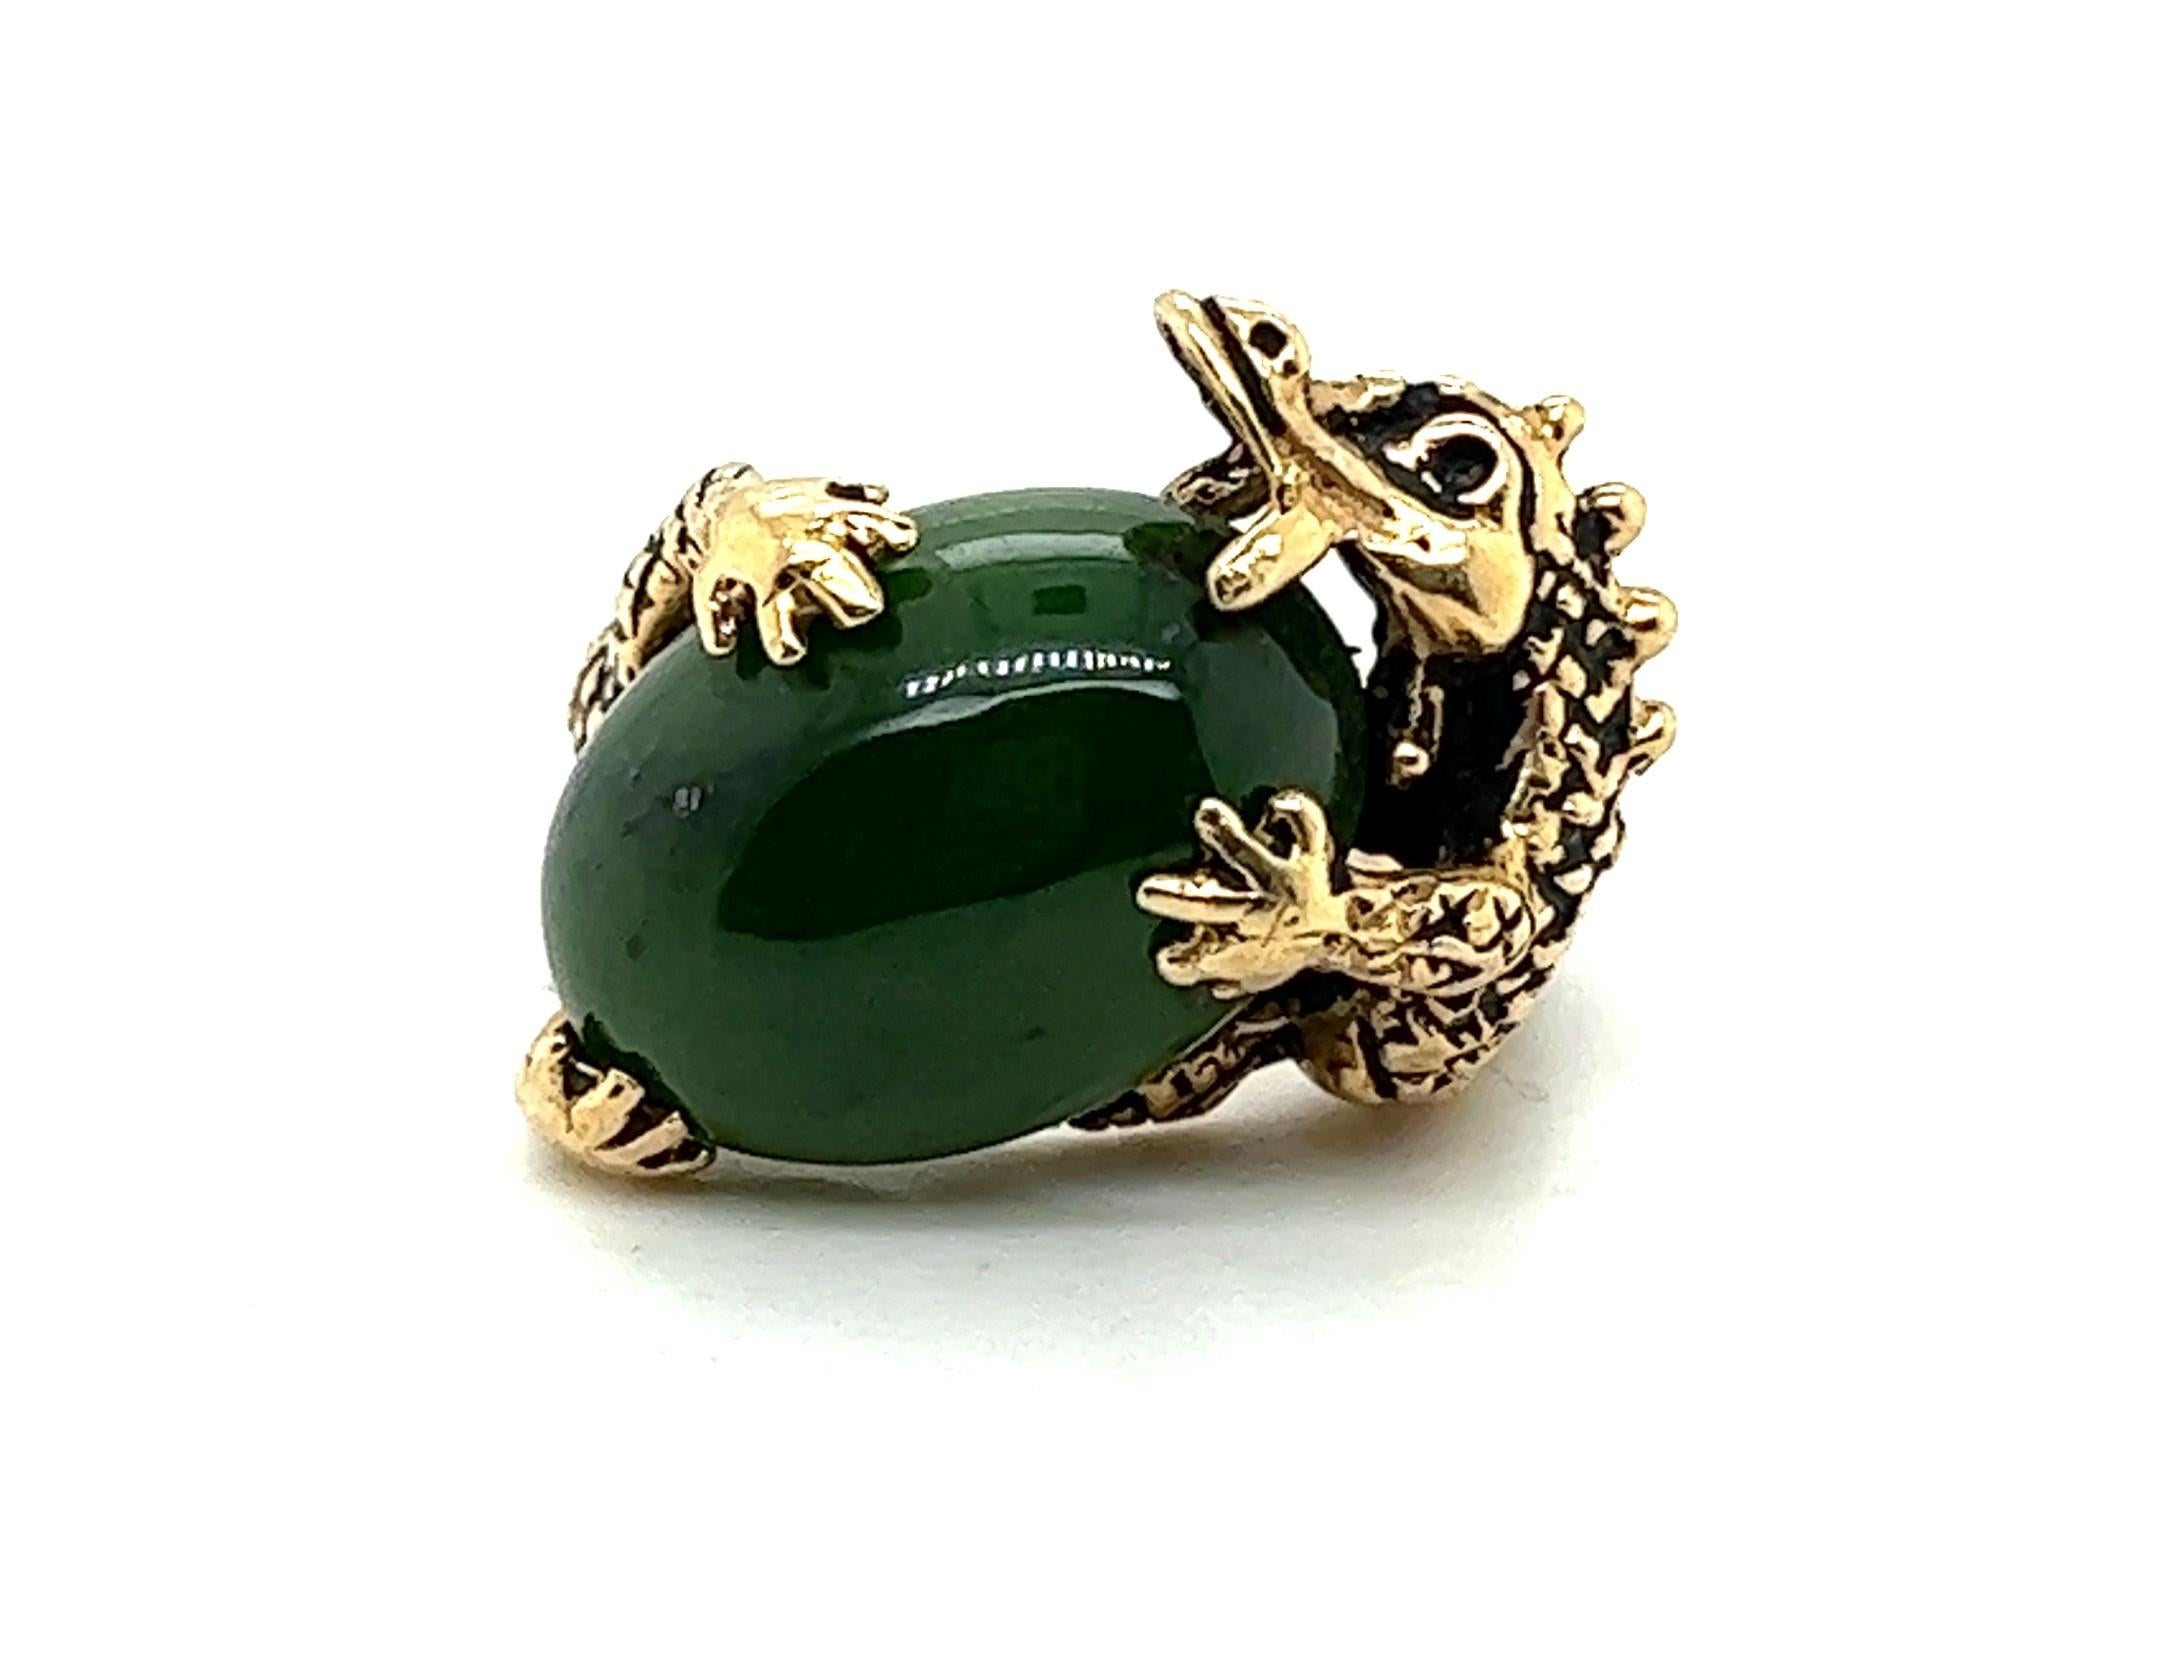 Seen as protectors of gold and jewels in European mythology, dragons were often depicted with stacks of gold and bags of precious gems. Now you can have your own pet dragon to guard your jewels as well as this lush 12.97ct deep moss green jade. His